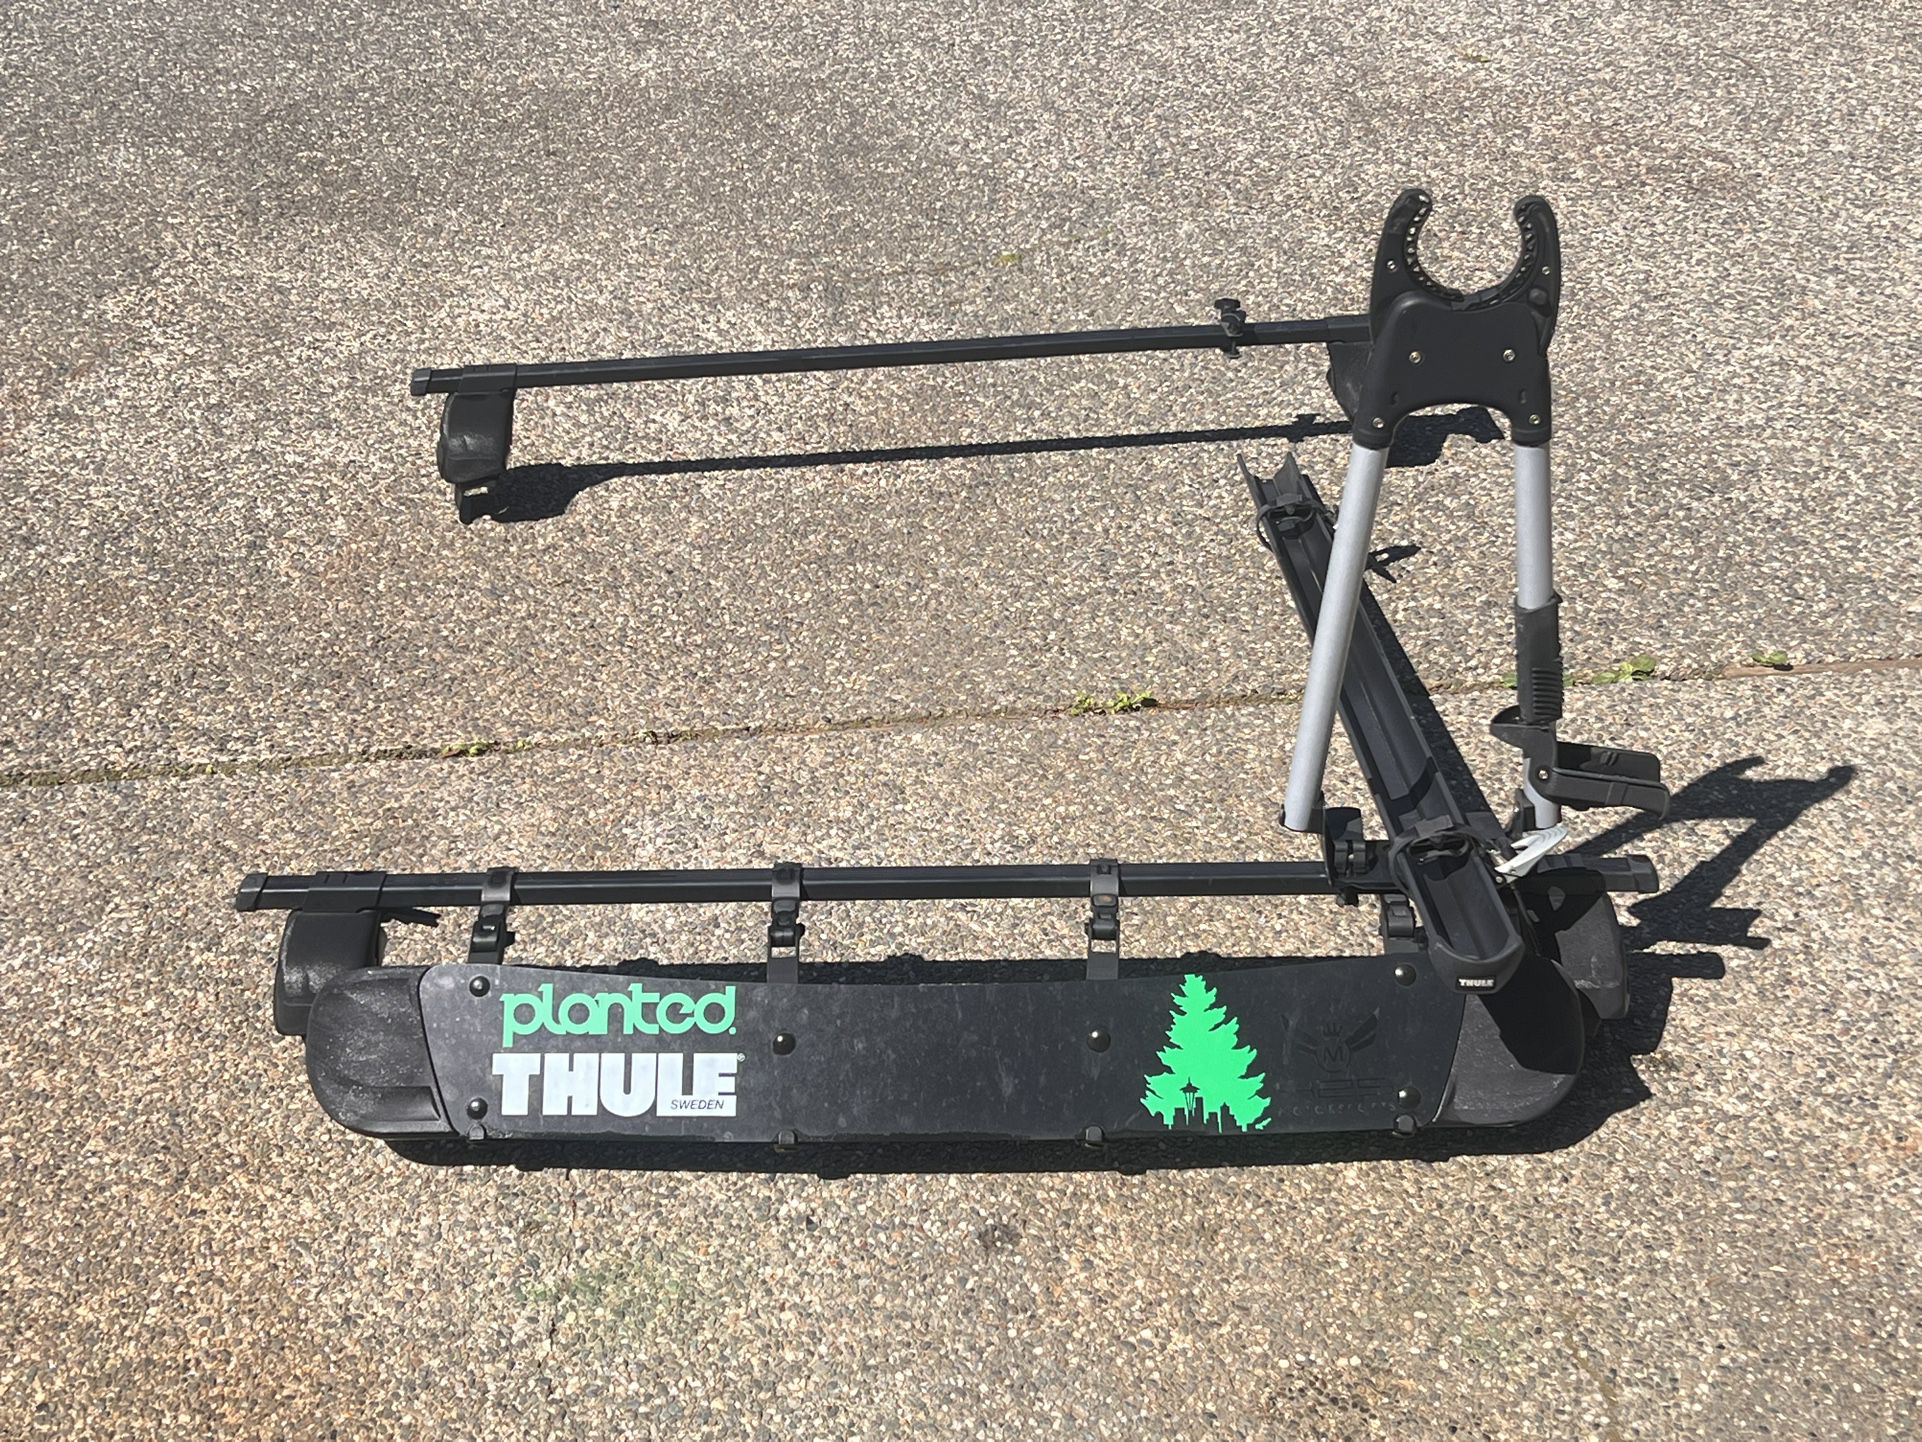 THULE SWEDEN Roof Rack With Bike Rack And Front Deflector Vw 